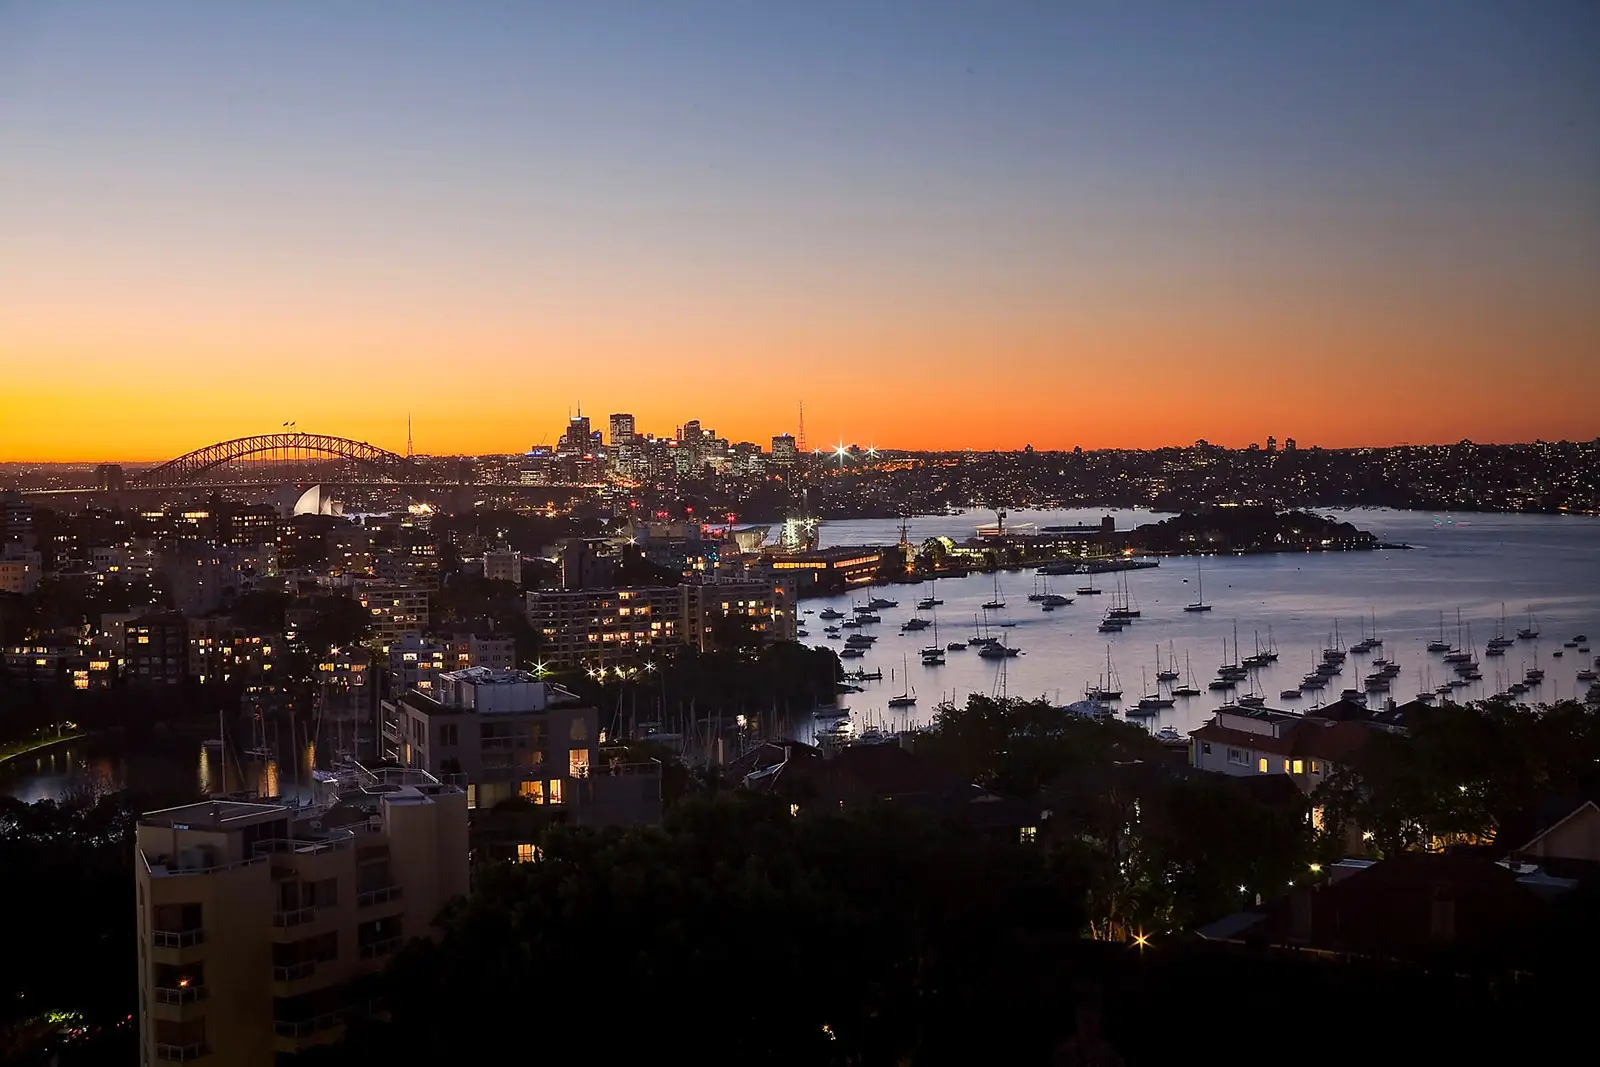 13A/3 Darling Point Road, Darling Point Leased by Sydney Sotheby's International Realty - image 1